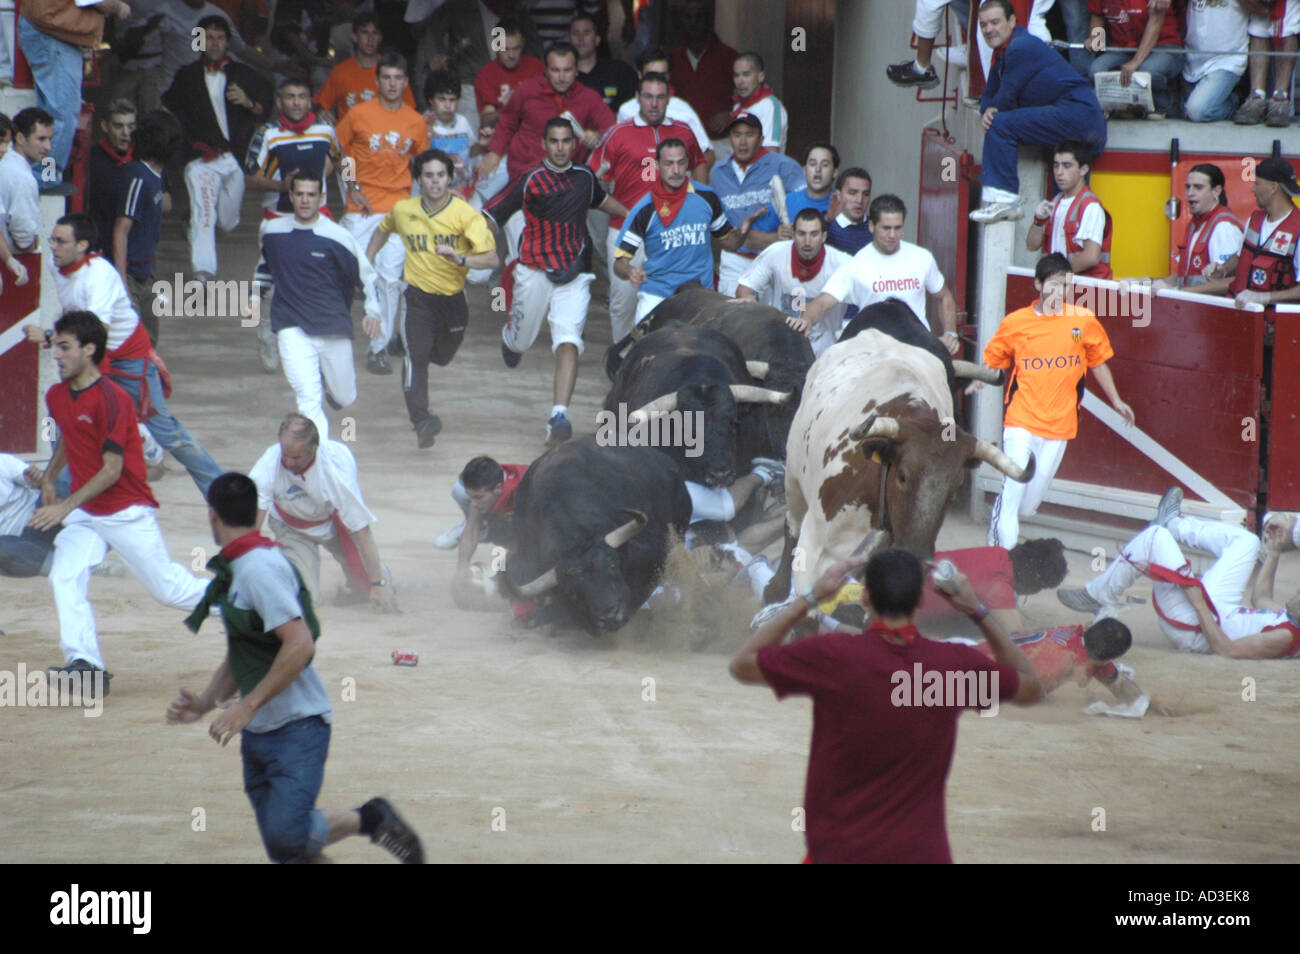 The bulls charge over a group of fallen runners in the entrance to Pamplona's bullring Stock Photo